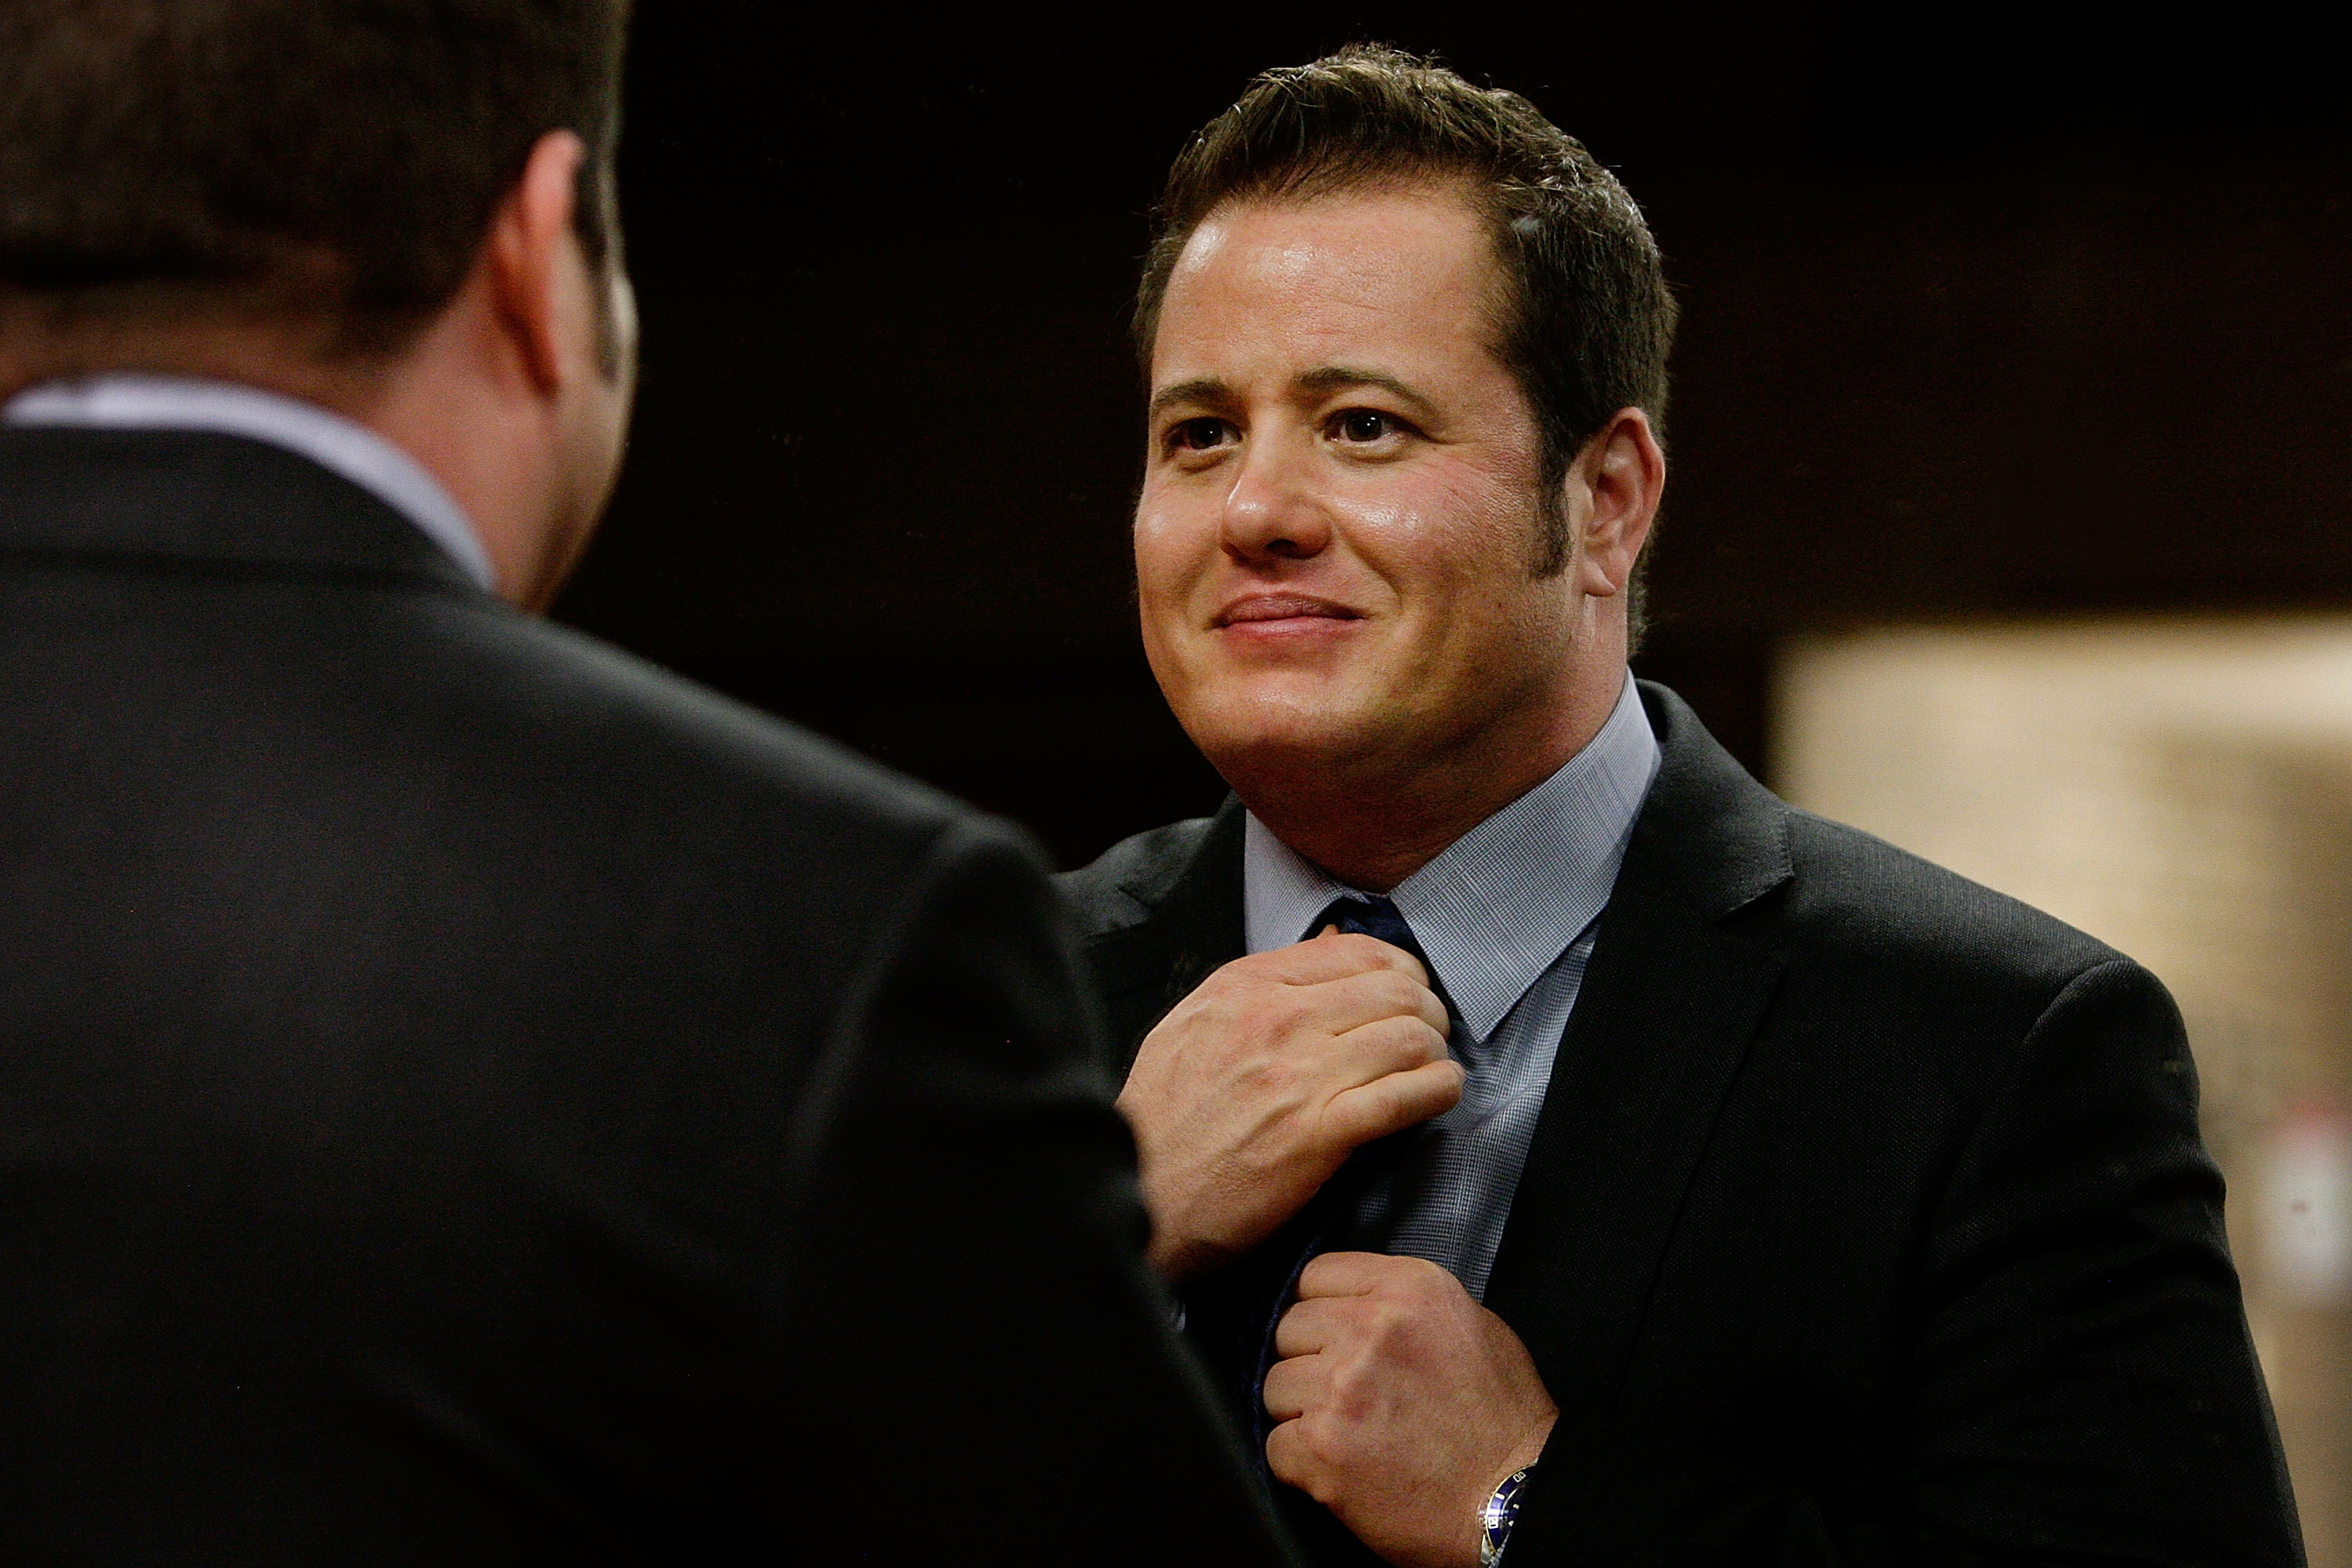 Chaz Bono adjusts his tie prior to appearing on stage at the Sydney Gay & Lesbian Mardi Gras in Australia, on February 26, 2014. | Source: Getty Images